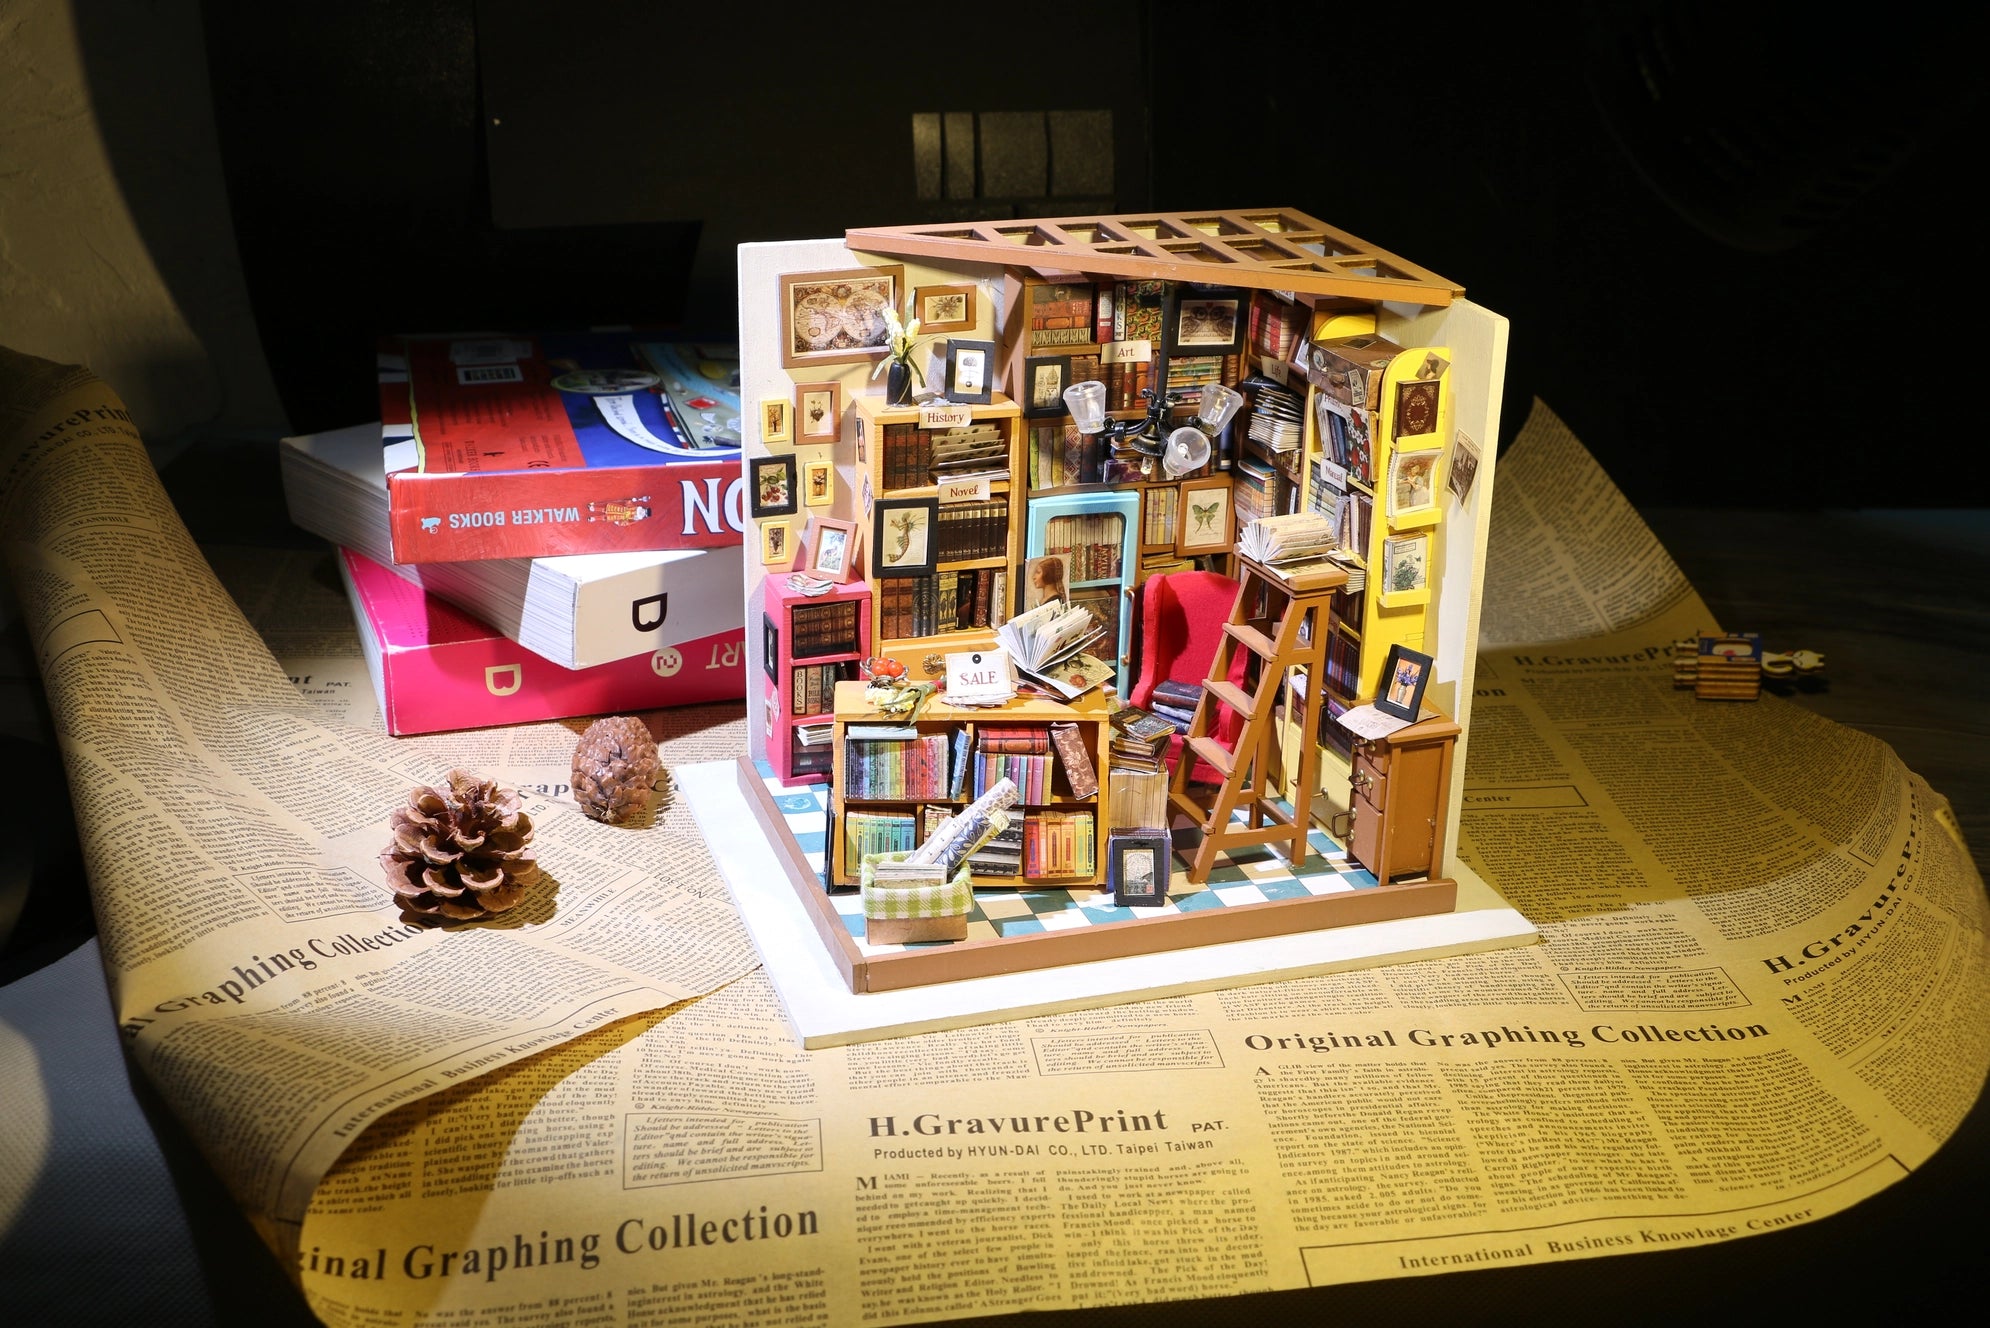 A magical miniature dollhouse from Sam's Study Rolife Library DIY collection, offering enchanting services to creatures above and below. Dimensions: 8.3 x 5.2 x 6.9 in.